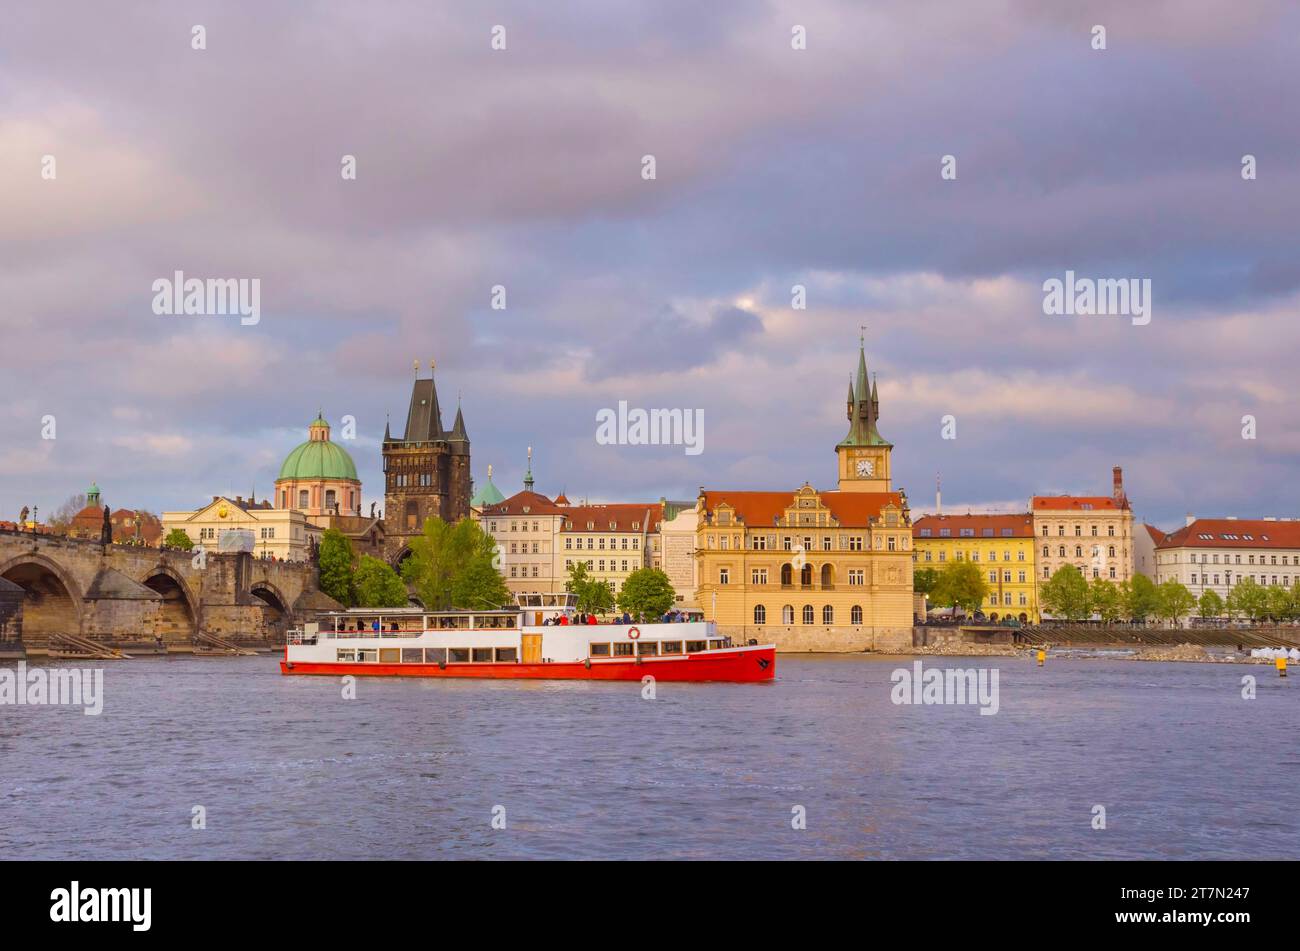 View of old town with Charles Bridge (Karluv Most) on Vltava river and Old Town Bridge Tower, famous tourist destination in Prague, Czech Republic Stock Photo